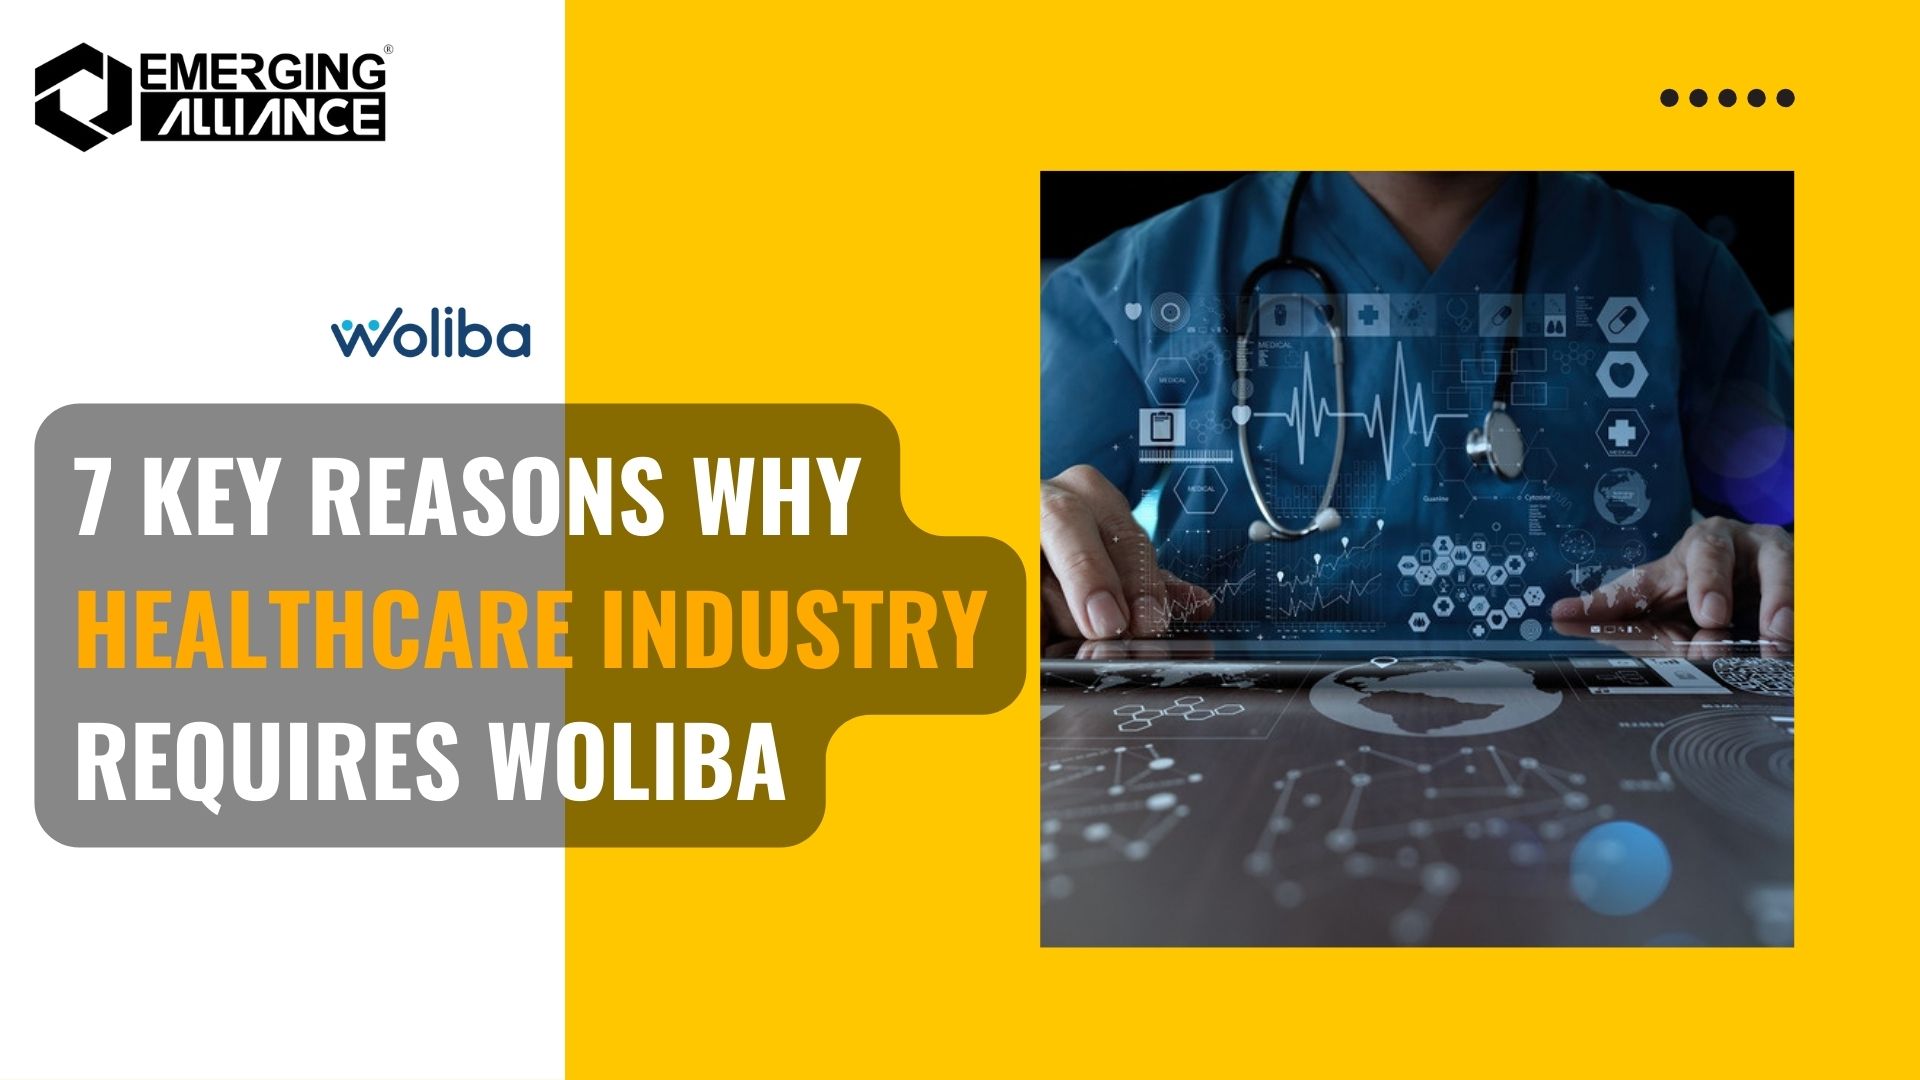 7 reasons of woliba for healthcare